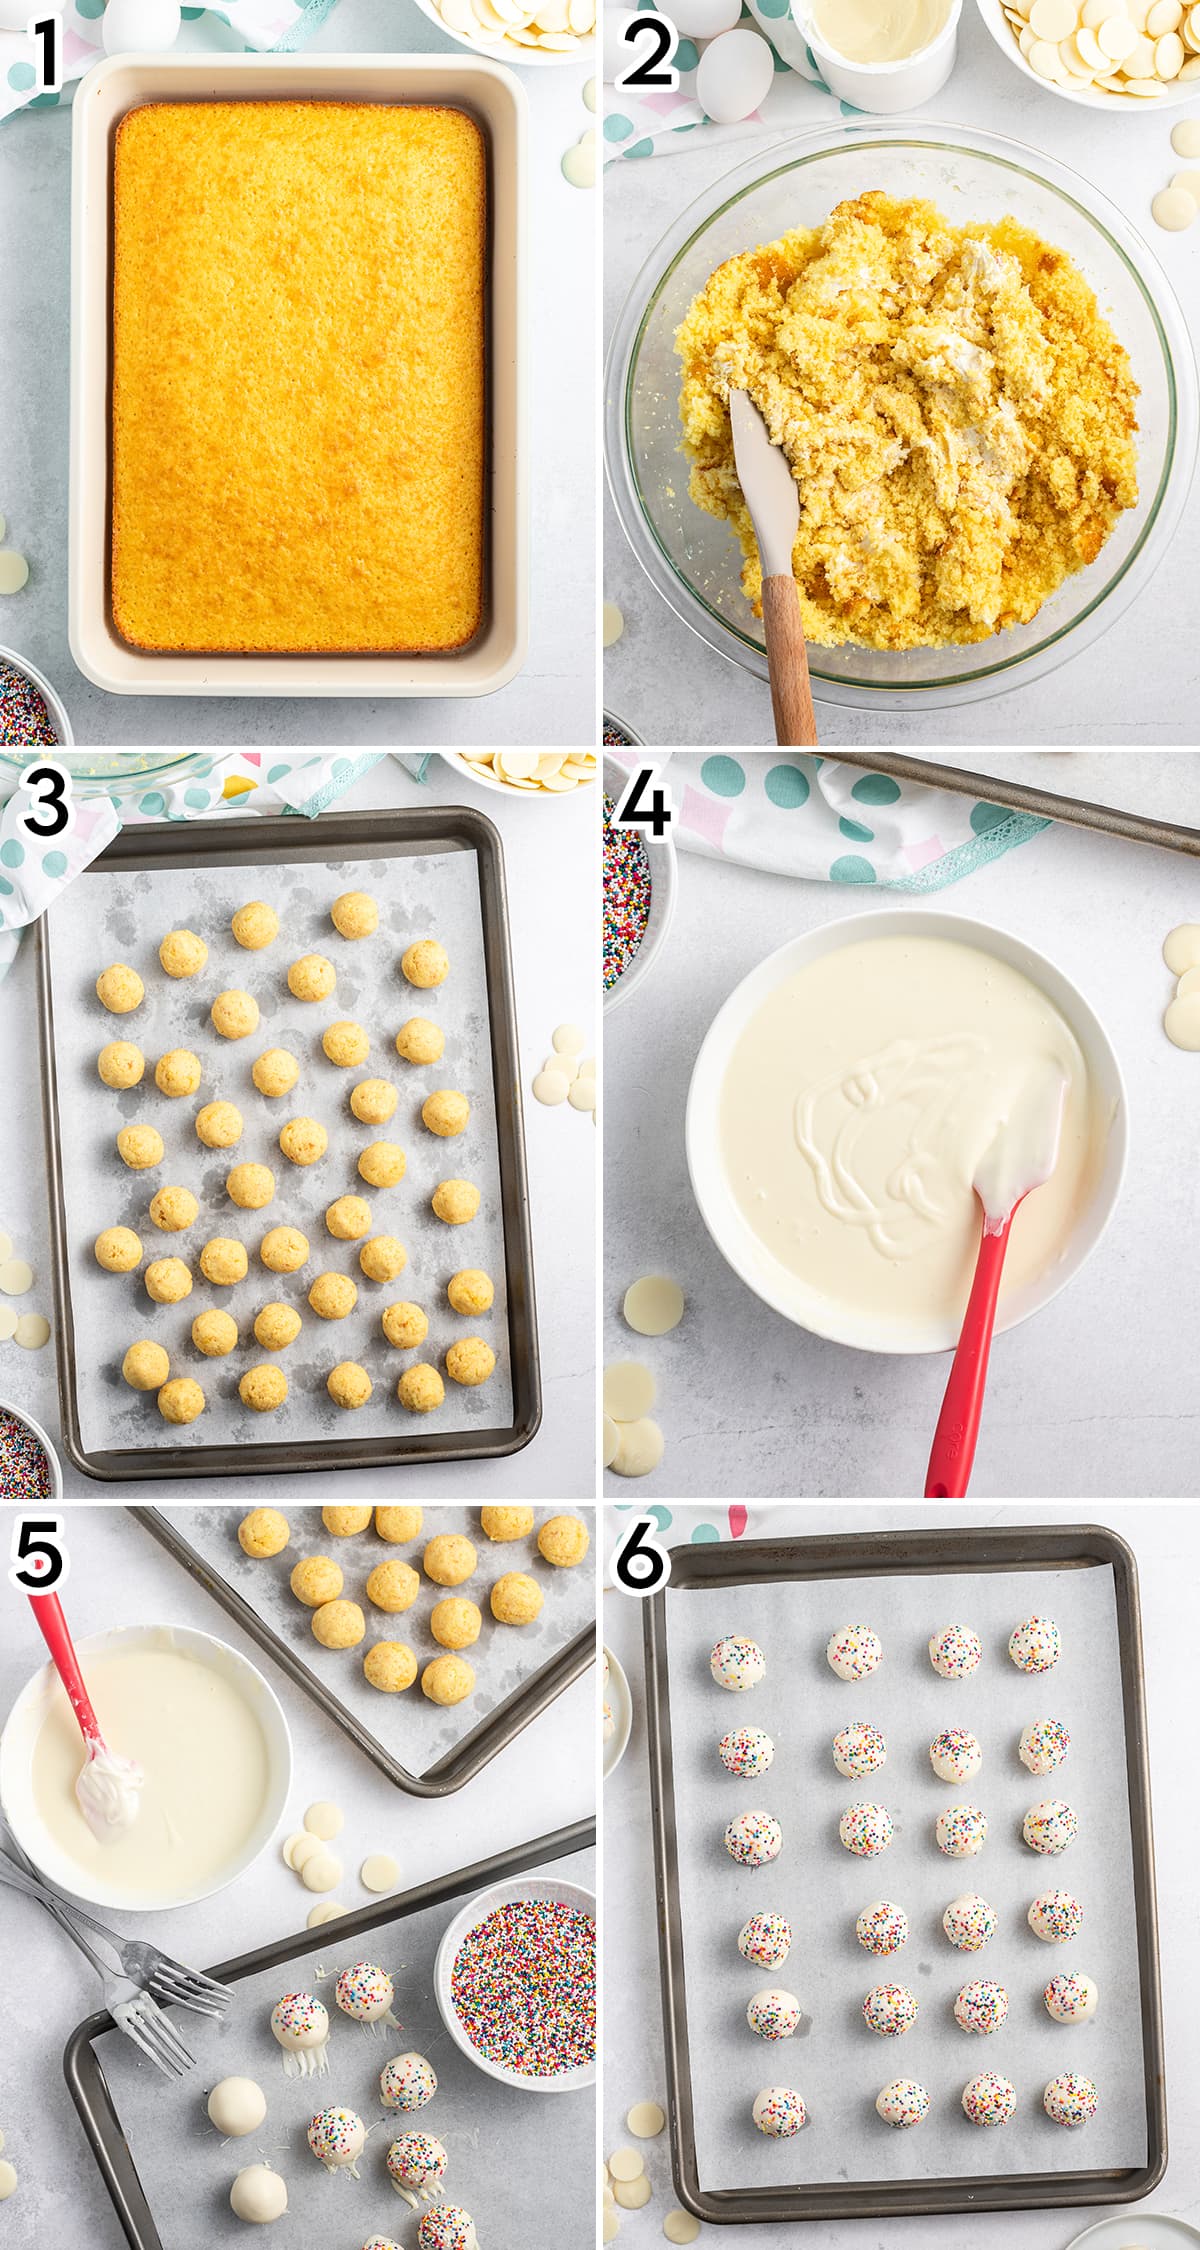 A collage of 6 photos showing the steps involved in making cake balls.